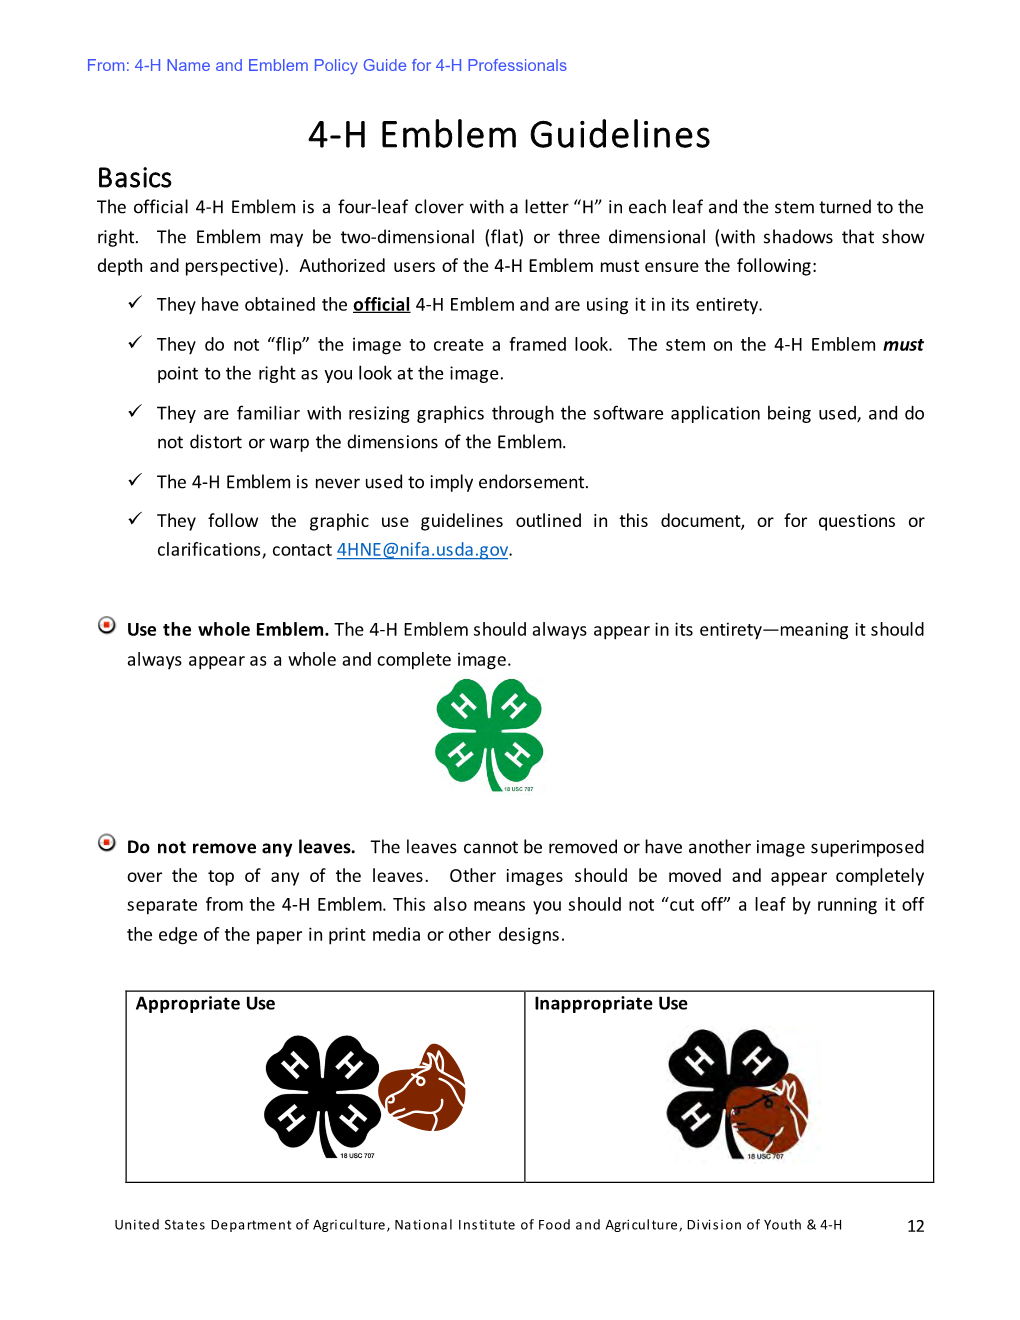 4-H Emblem Guidelines Basics the Official 4-H Emblem Is a Four-Leaf Clover with a Letter “H” in Each Leaf and the Stem Turned to the Right